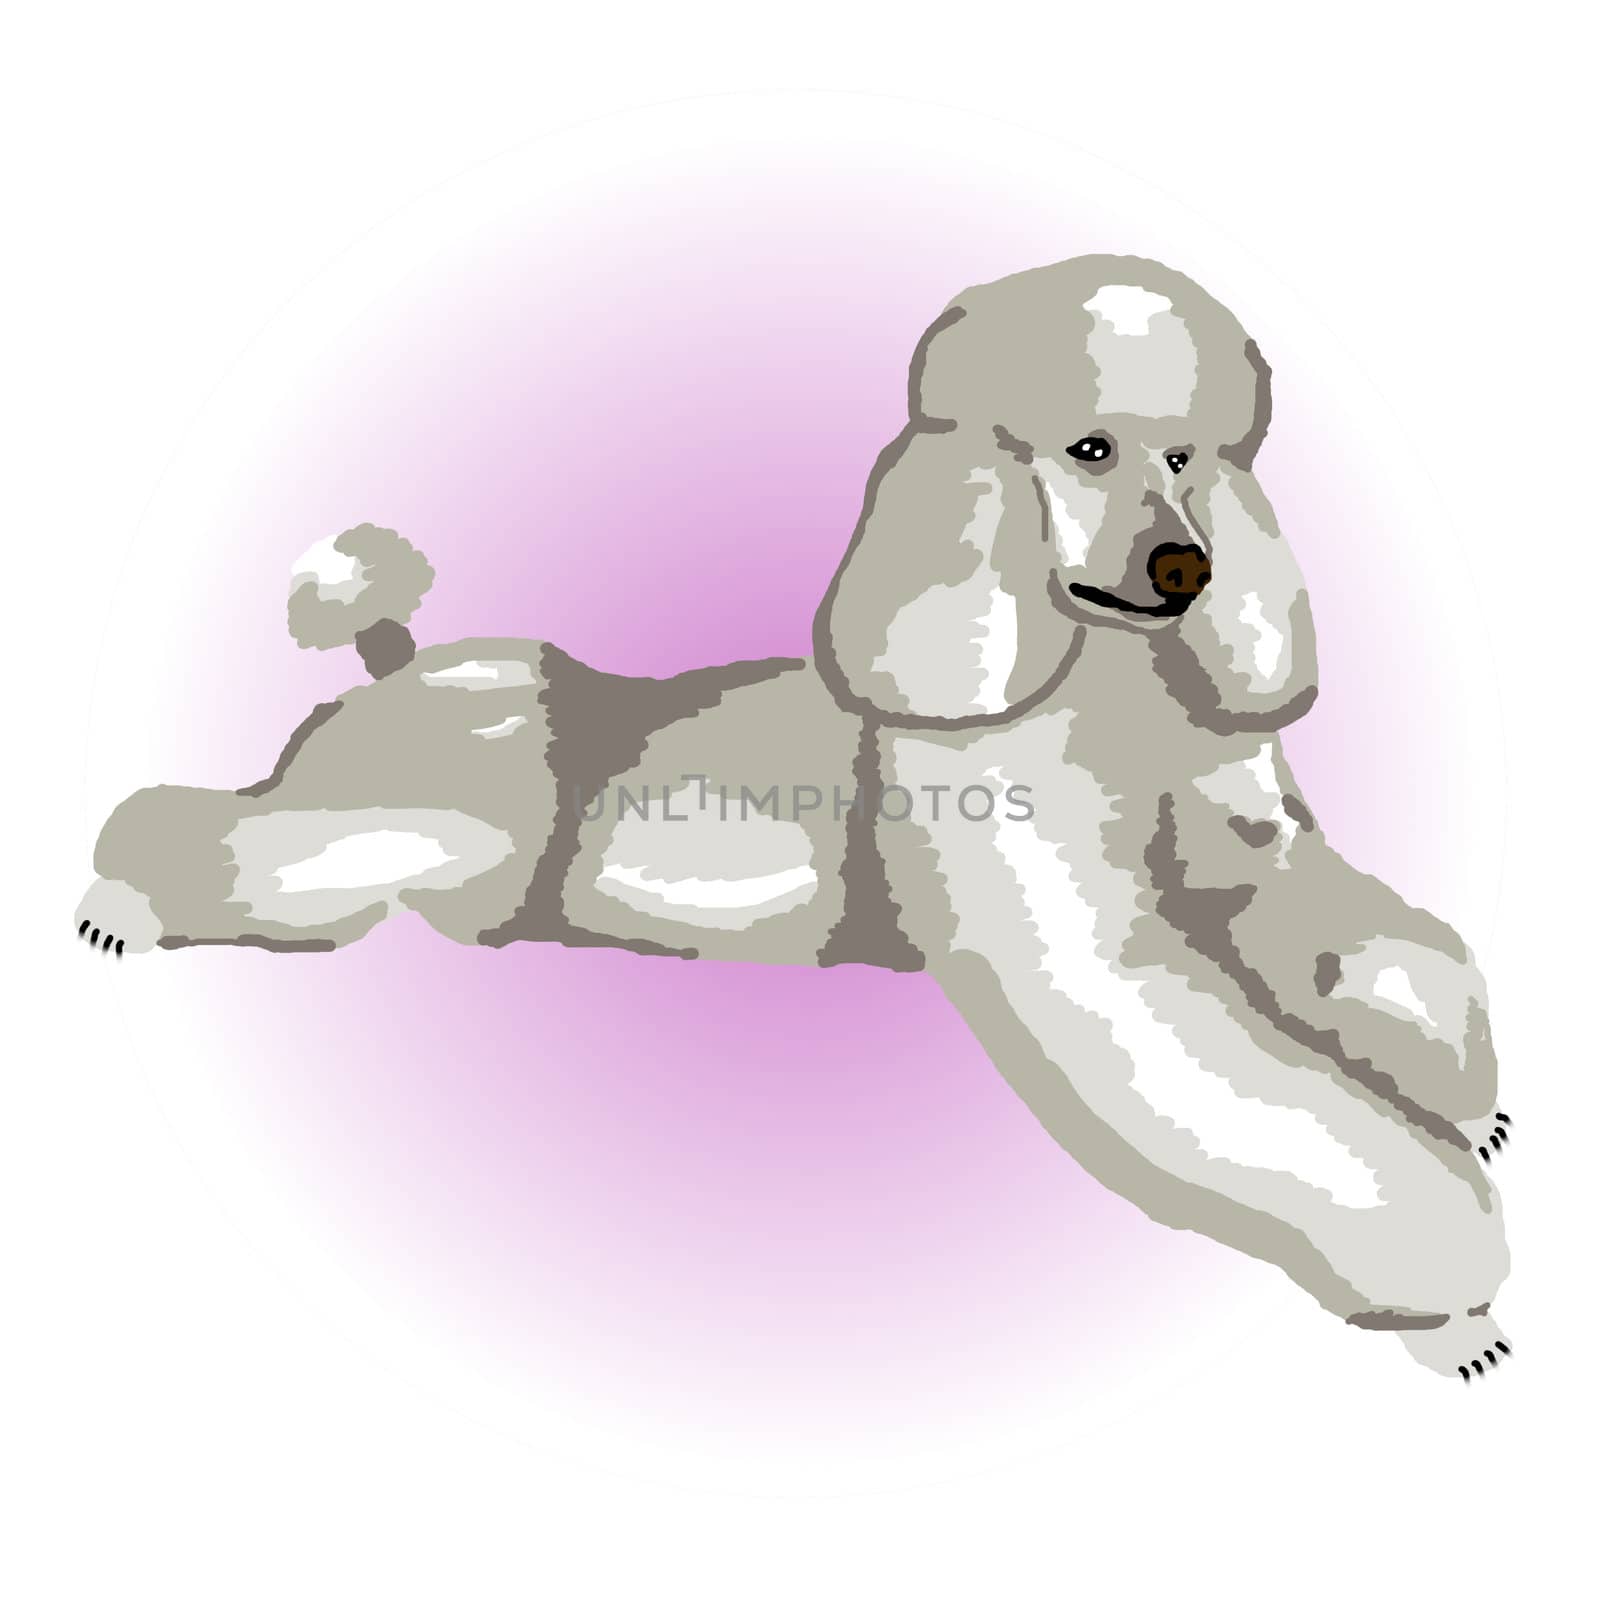 A silver poodle relaxing lying down with a purple color spot in the background - a raster illustration.